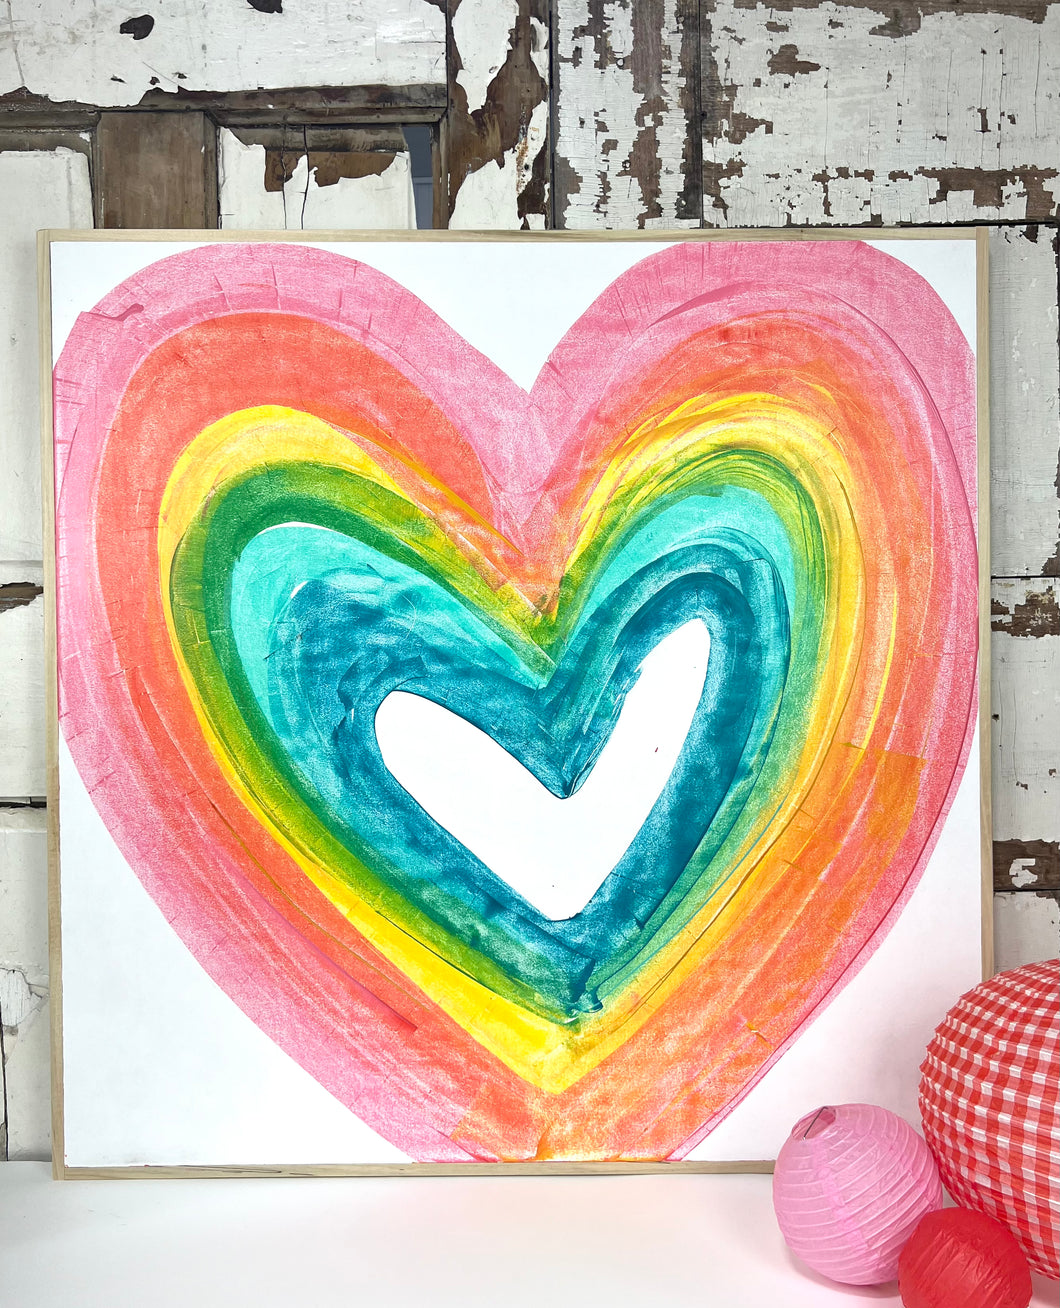 37x37 Hand-Painted Heart Sign B